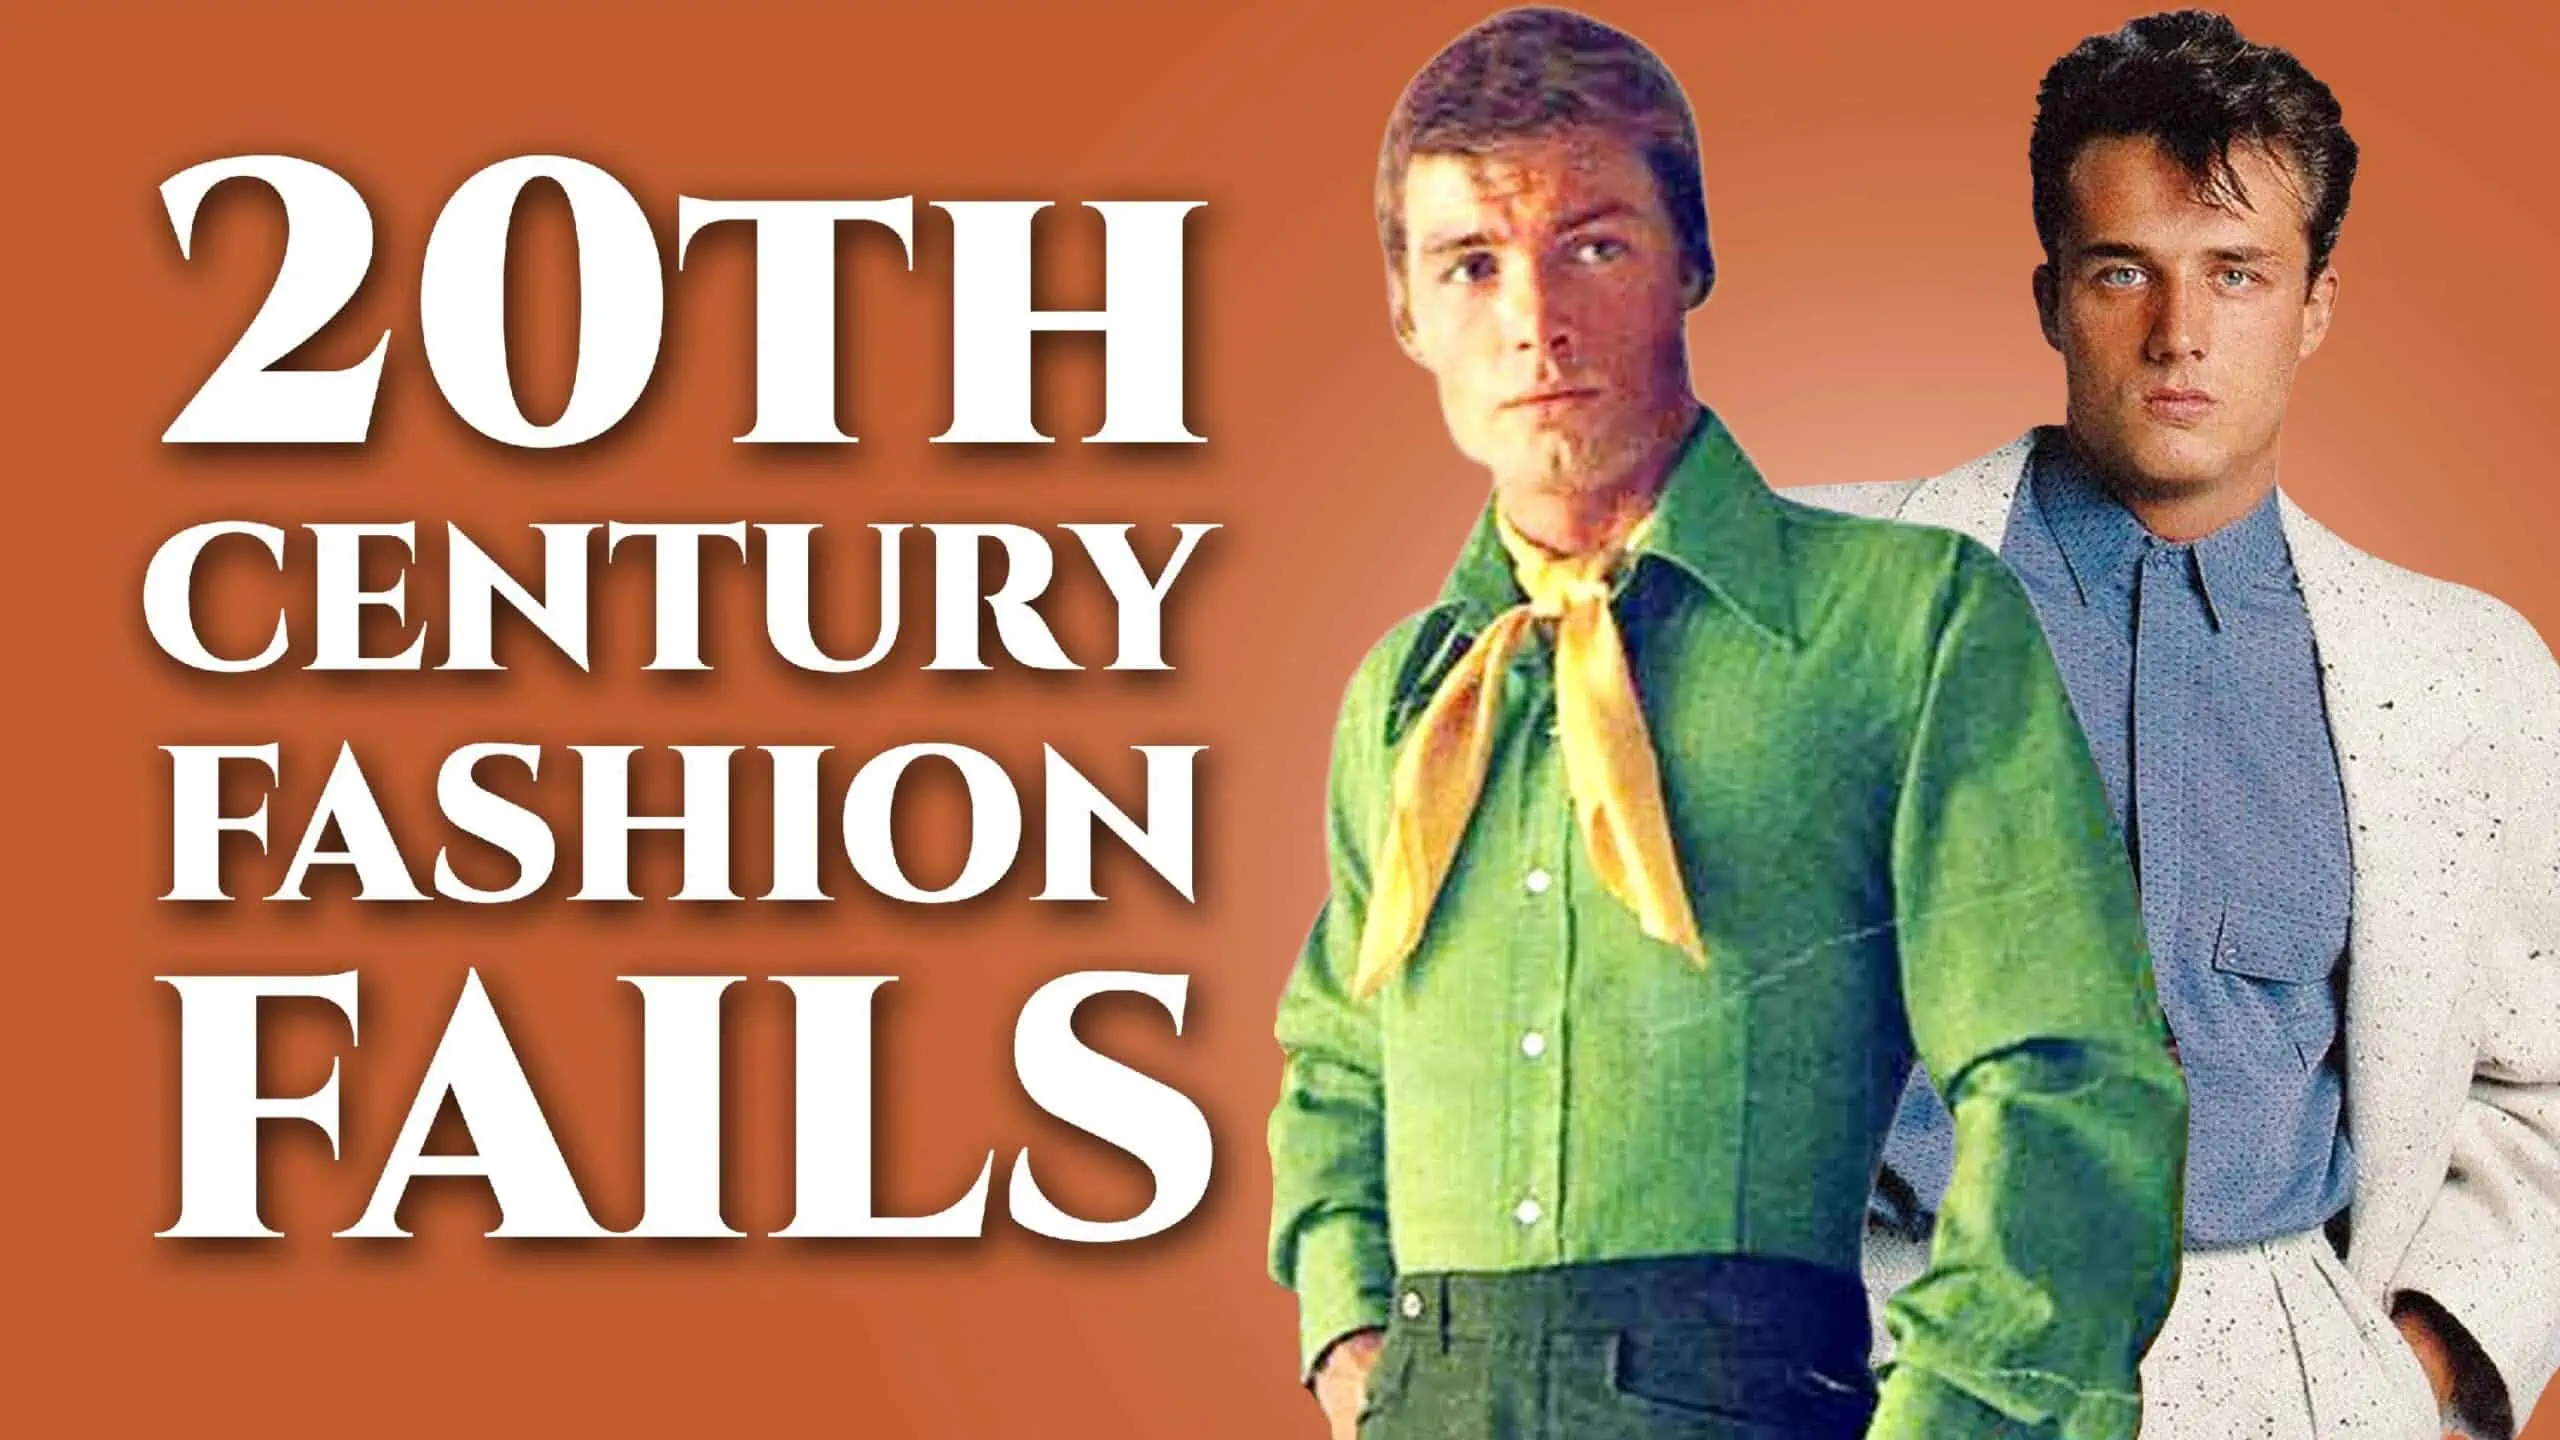 The WORST Men's Fashion Fails Of The 20th Century!